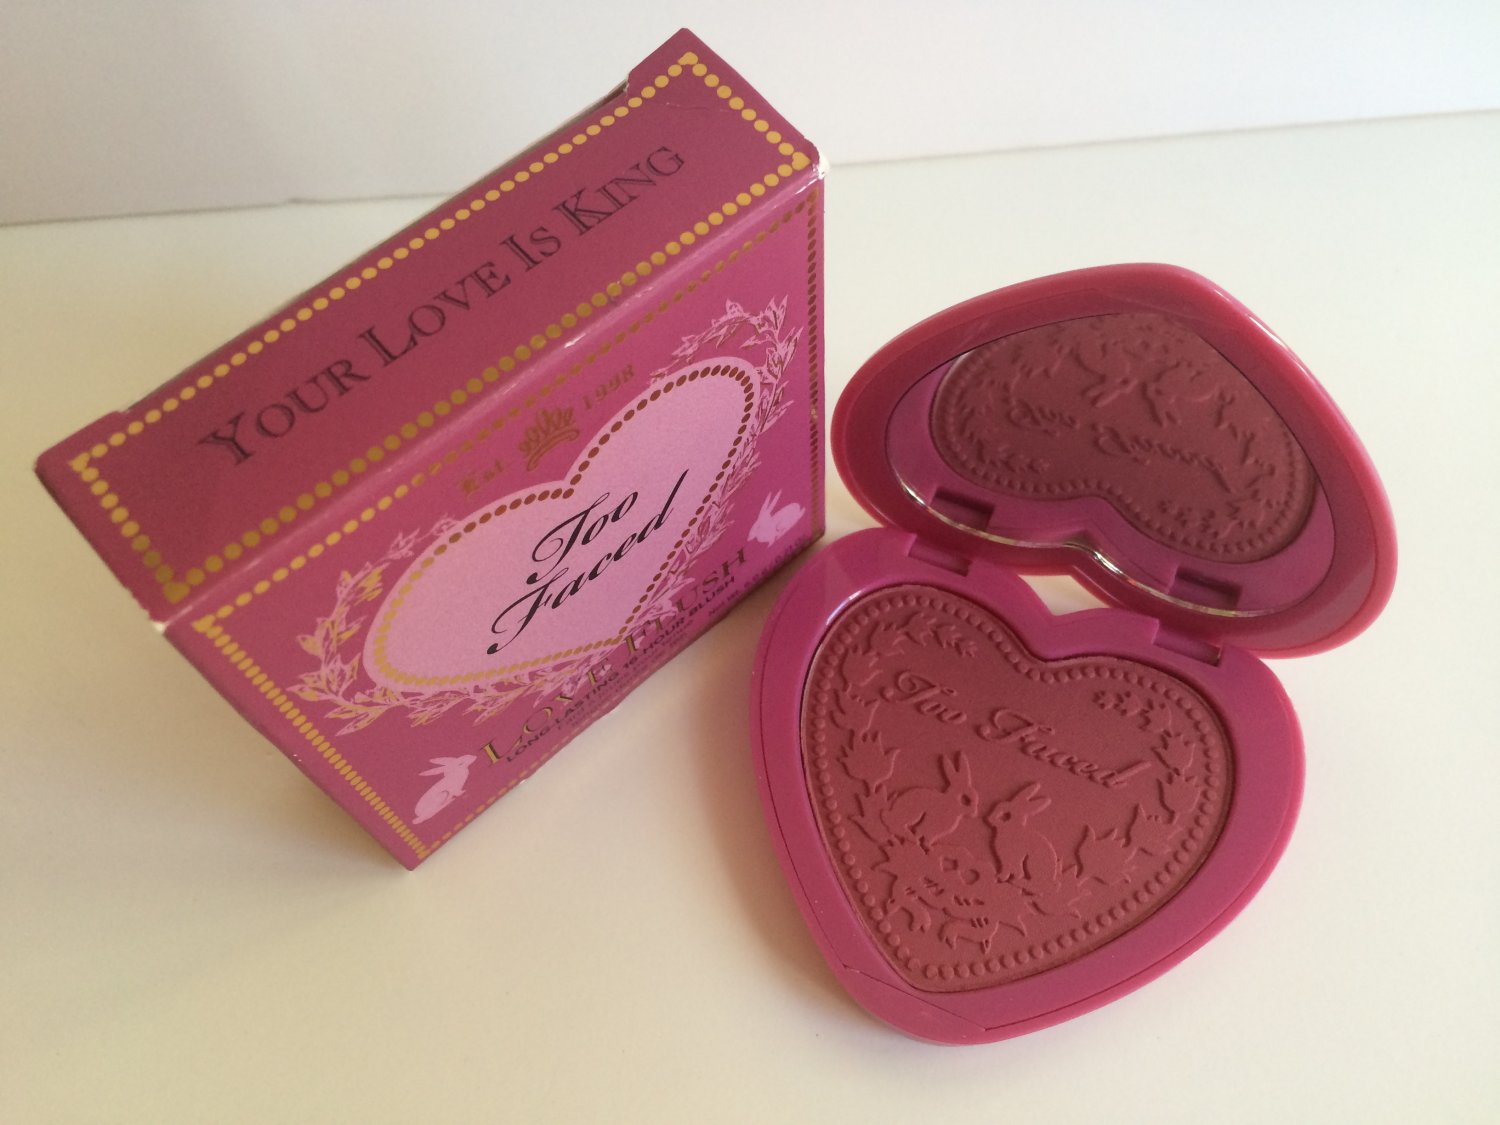 Too Faced Love Flush Long Lasting 16 hour Blush - Your Love is King (BNIB) ...